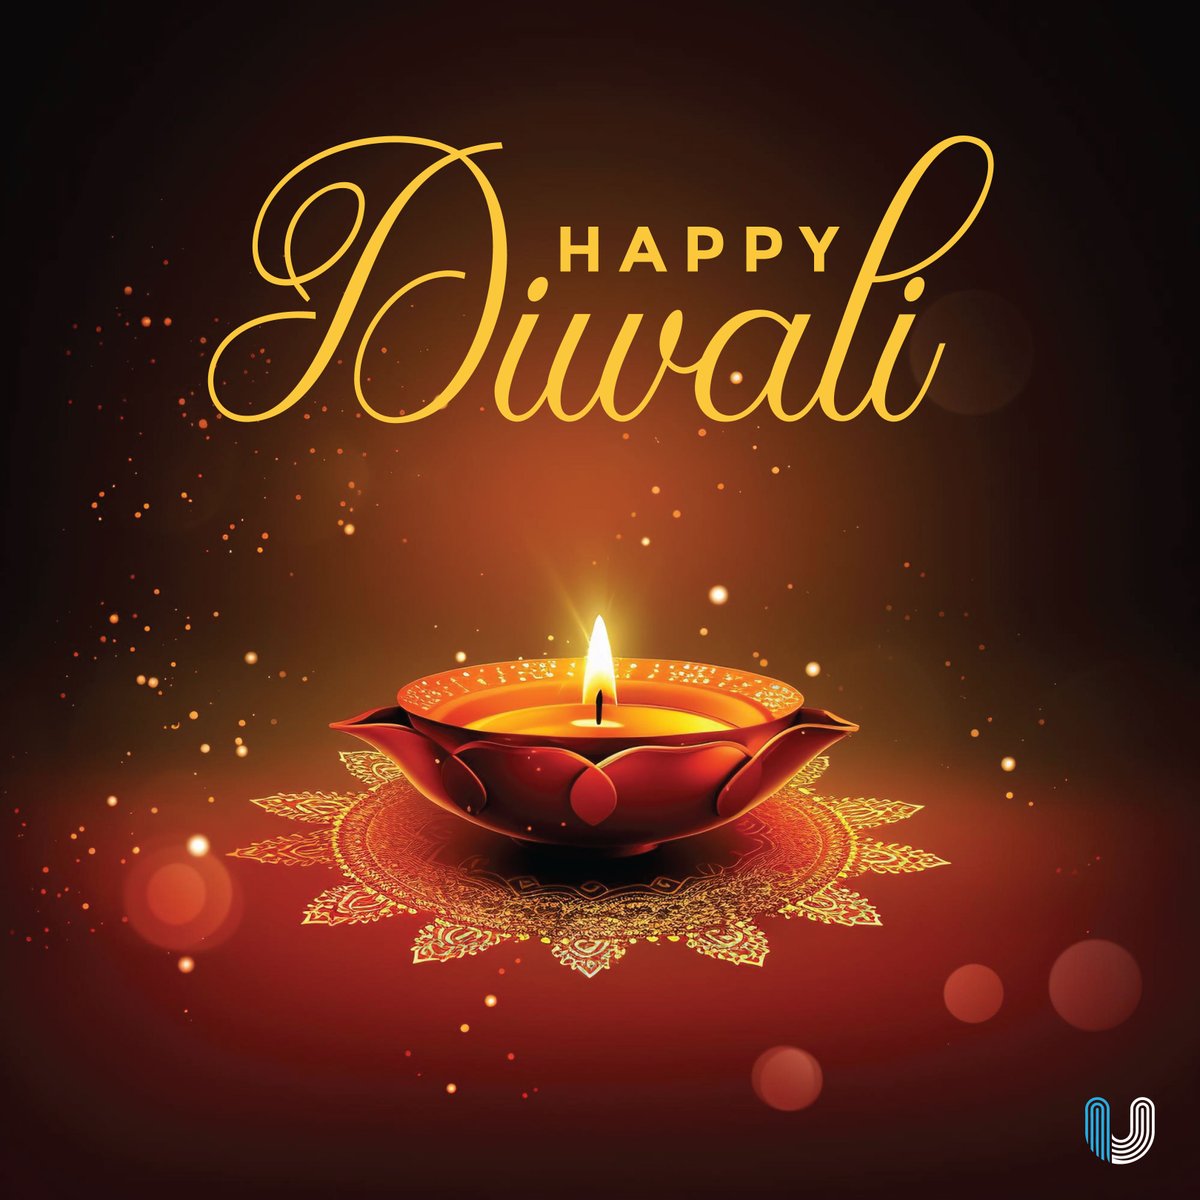 'Let's light up the darkness with some backup power this Diwali! Unitrends wishes you a joyous and prosperous celebration.

 #HappyDiwali #FestivalofLights #BackupPower #Prosperity #UnitrendsCelebrates'